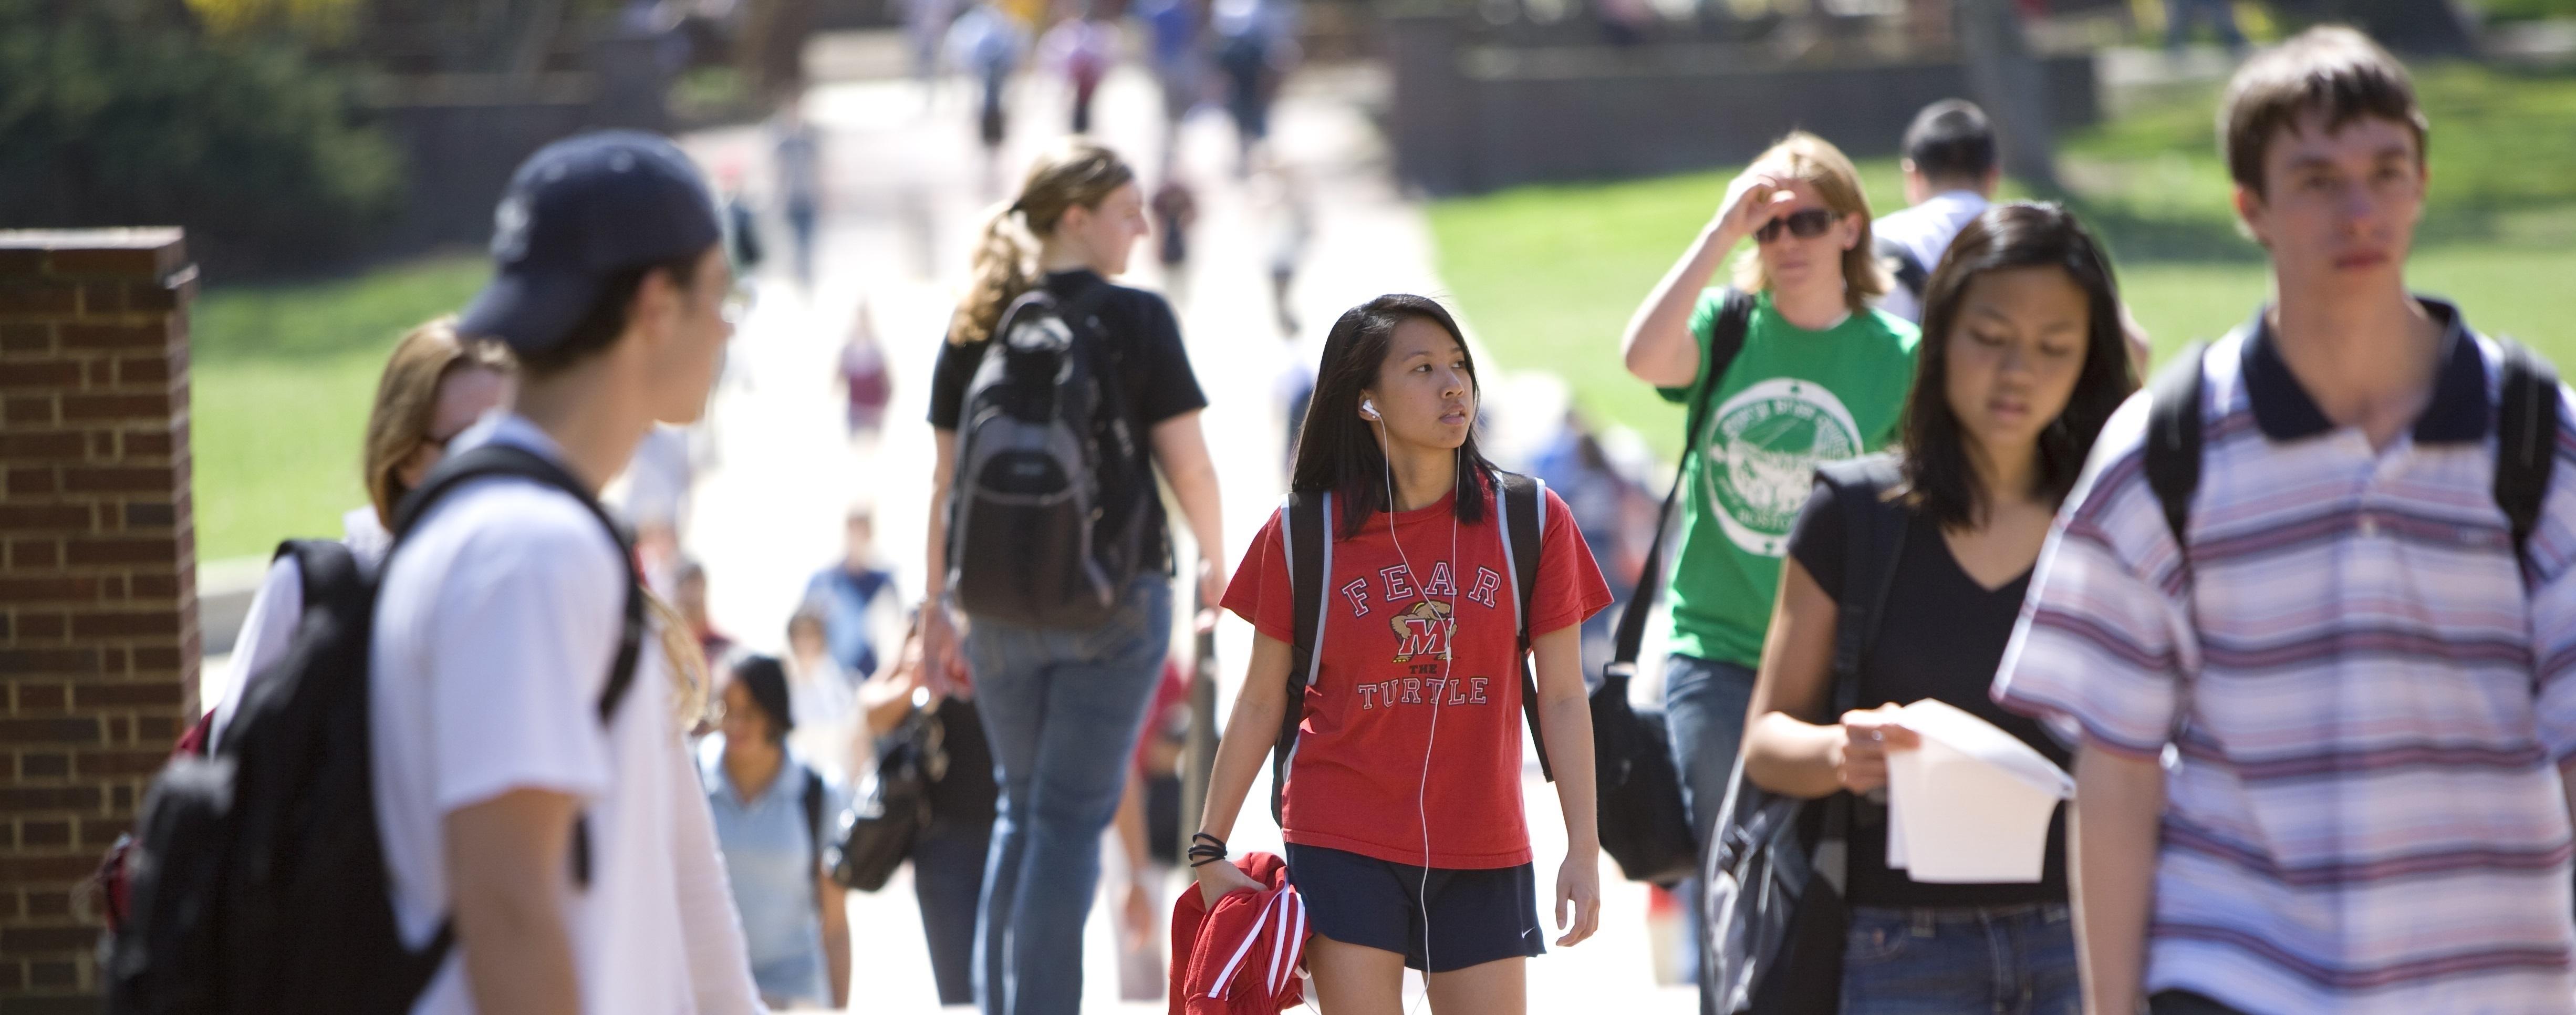 Female students wearing a red 'Fear the Turtle' tshirt walking in a crowd of people on the sidewalk near the Mall.